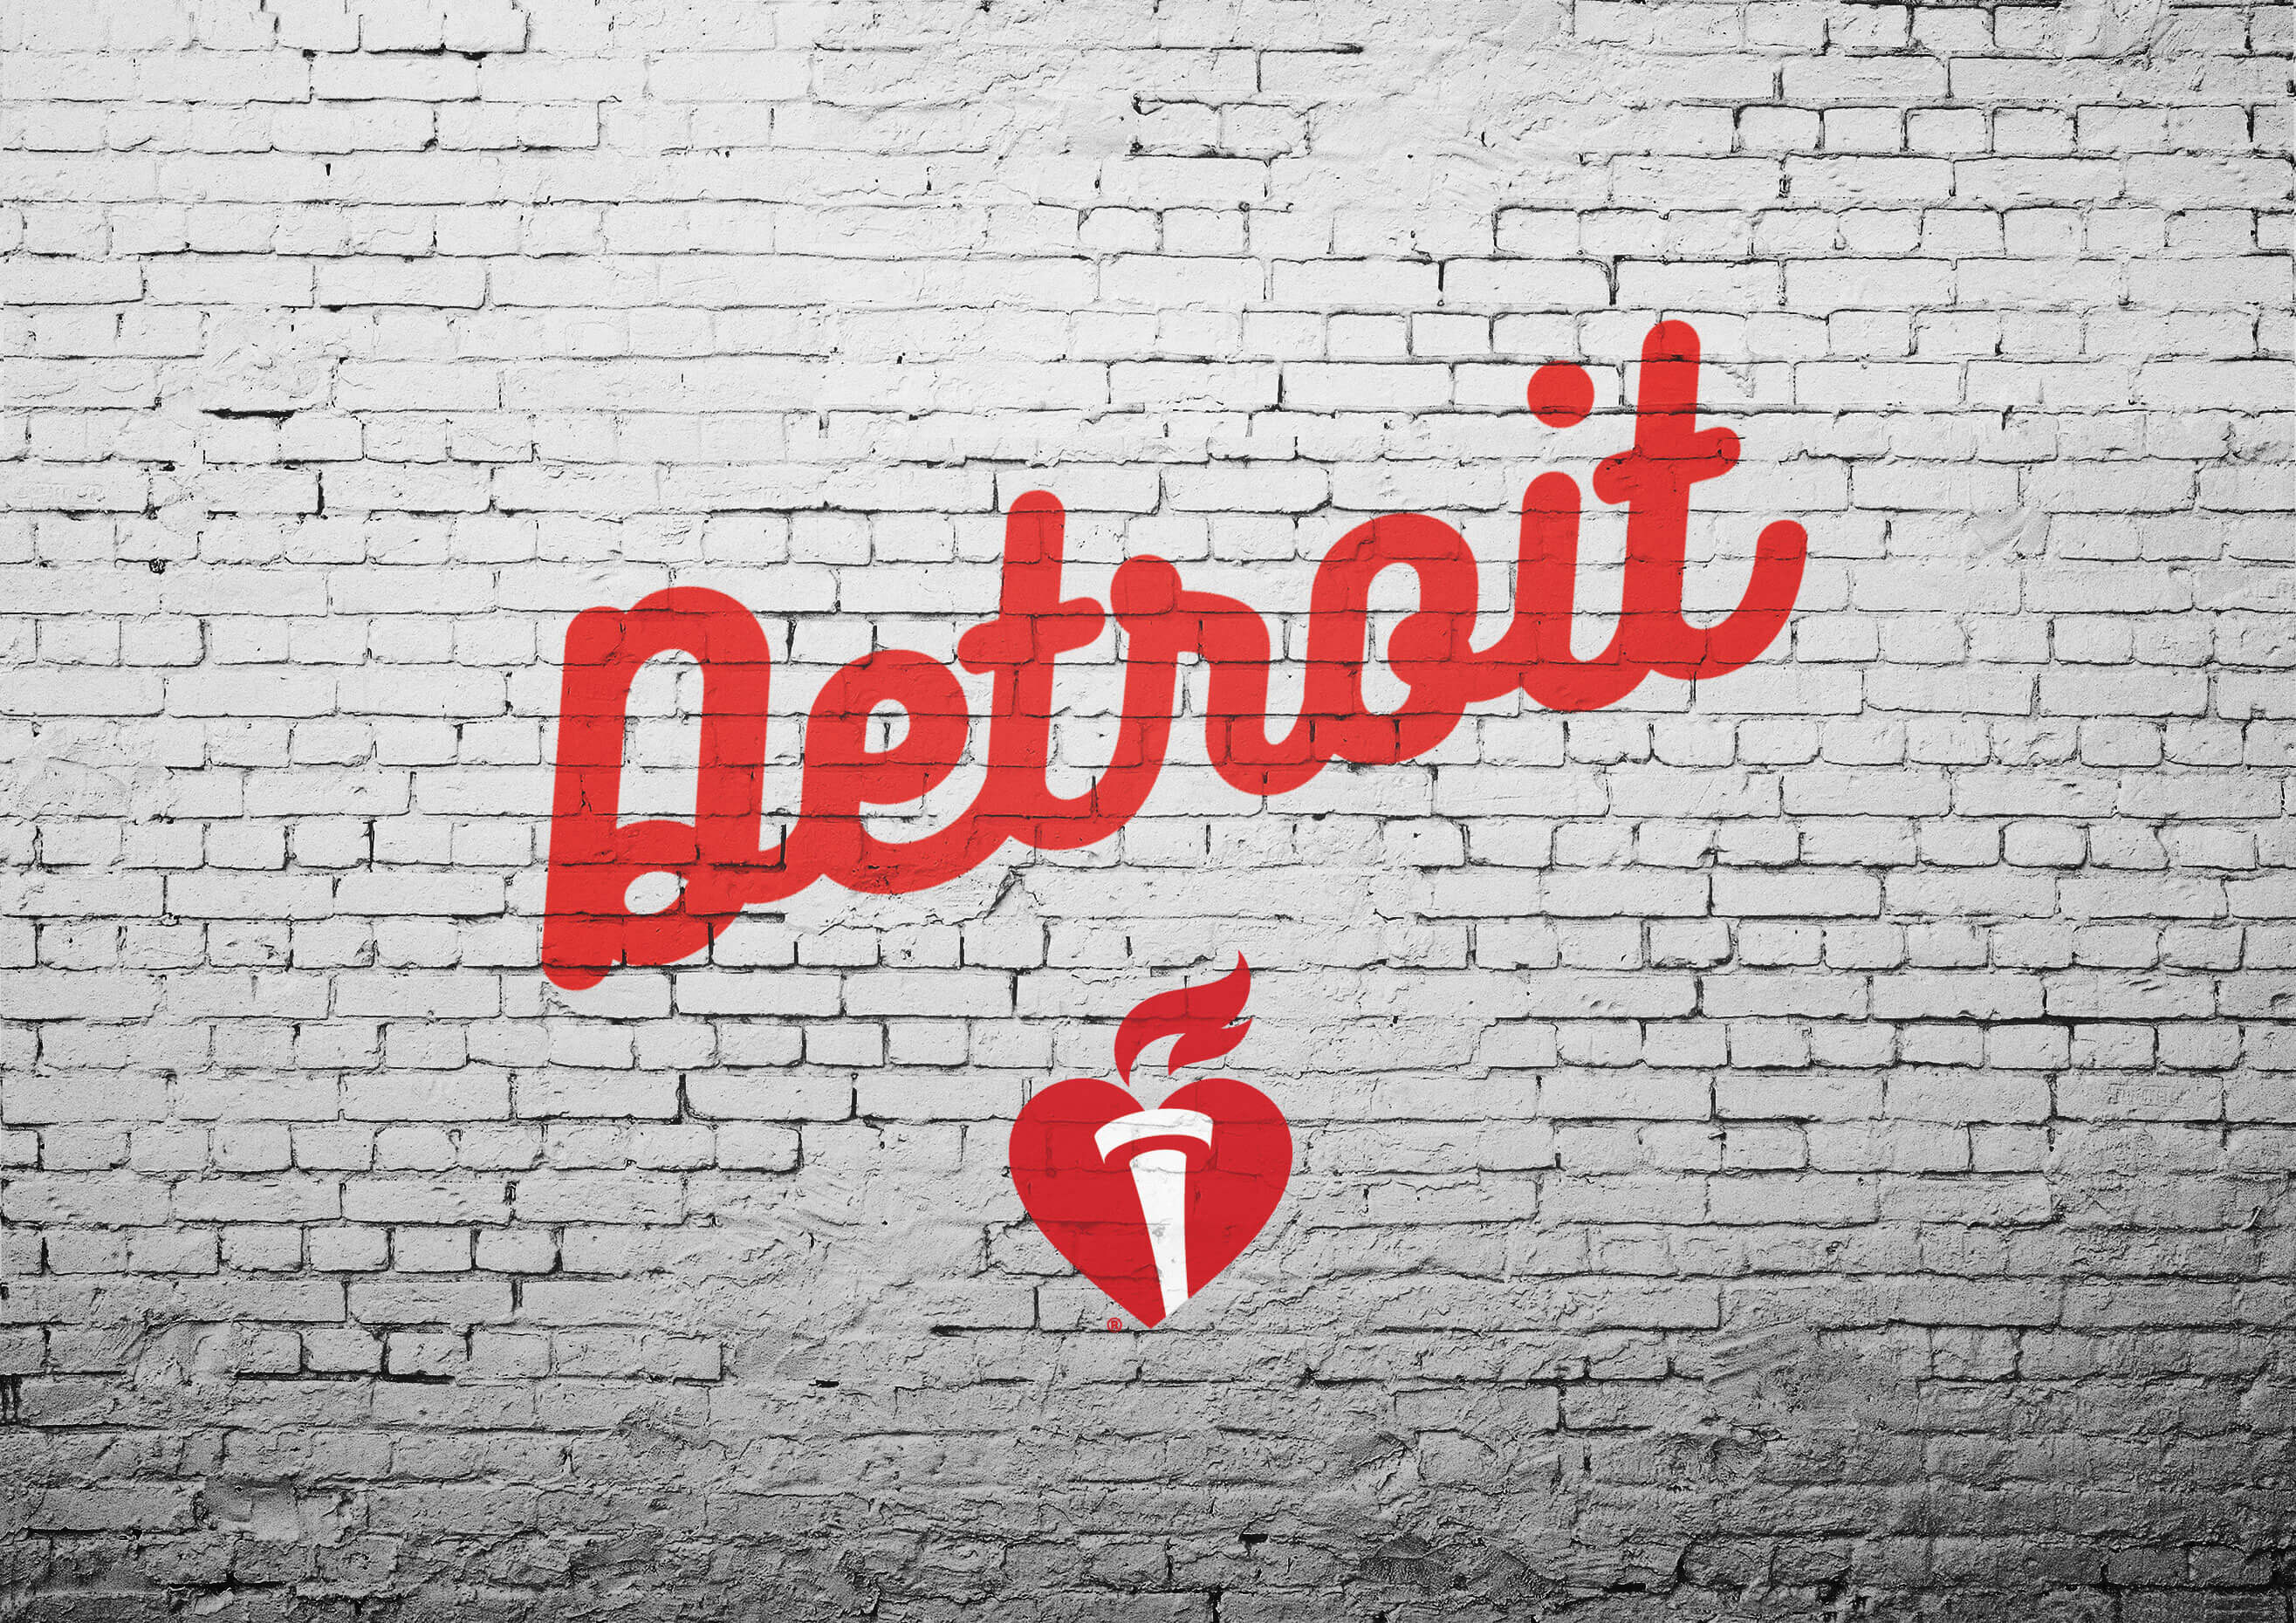 brick wall graphic with Detroit written on it and AHA heart and torch logo